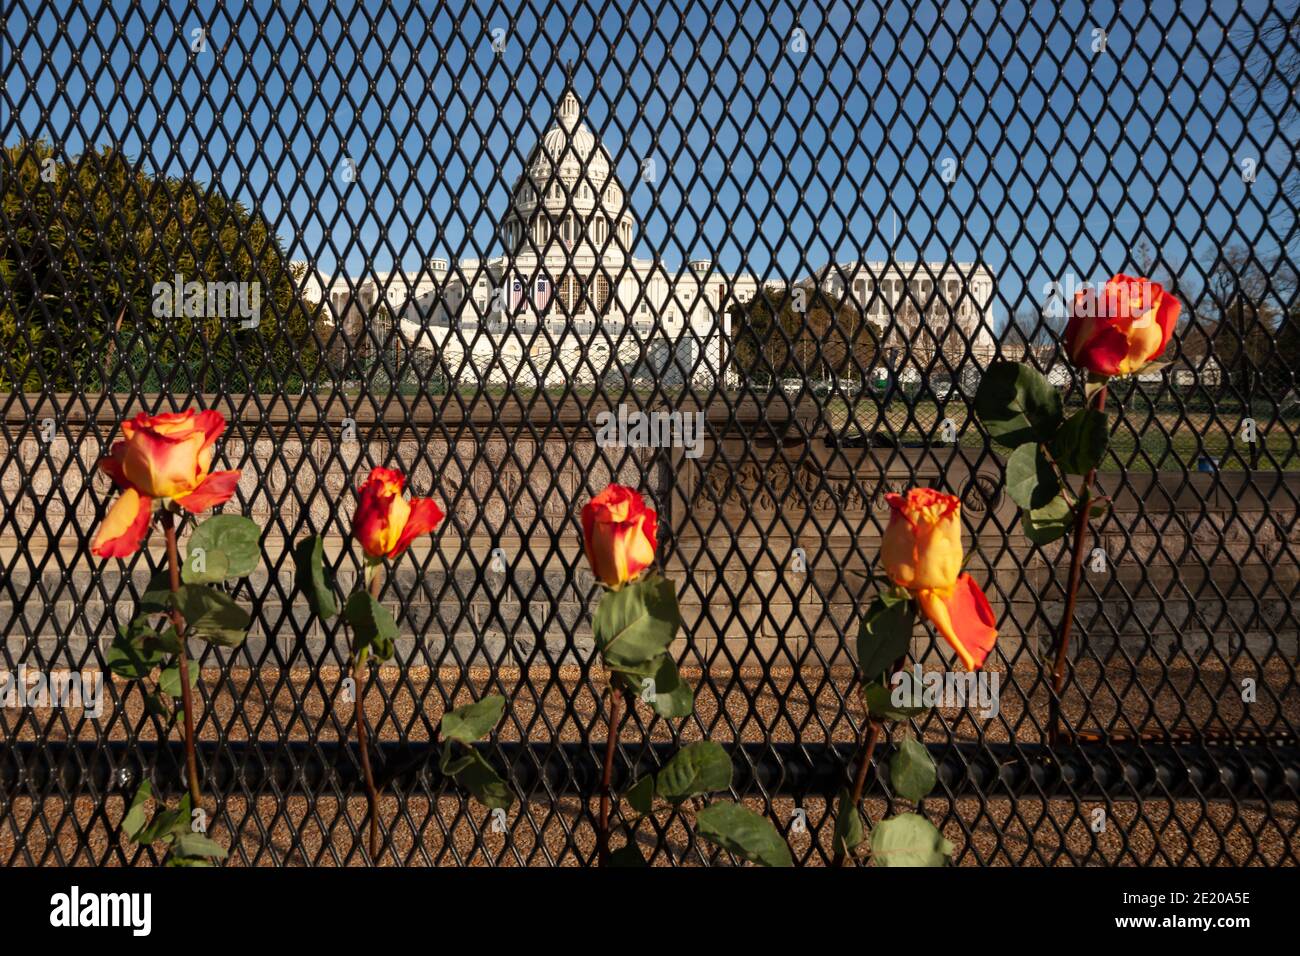 Washington, DC, USA, 10 January 2021.  Pictured: Five roses hang on the fence around the U.S. Capitol, installed after the insurrection of January 6.  The Capitol was the end point of Operation Clean Sweep, an an event to clean up trash and propaganda left behind by fascists and Trump supporters.  It was hosted by Continue to Serve, an anti-racist organization of military veterans.  Credit: Allison C Bailey/Alamy Live News Stock Photo